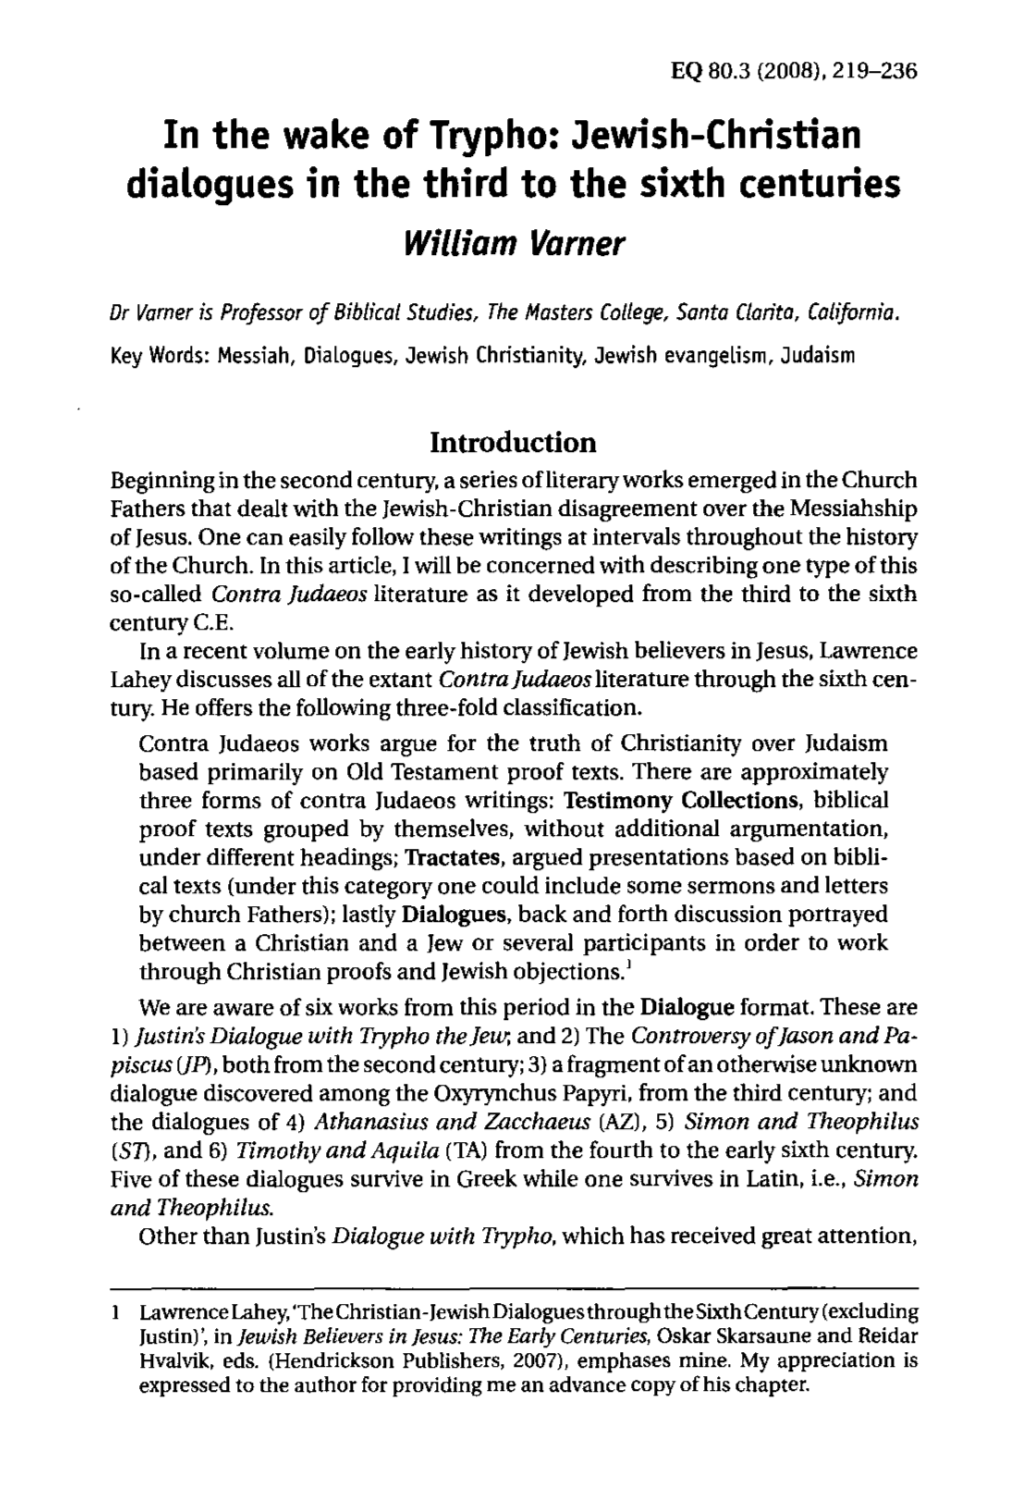 In the Wake of Trypho: Jewish-Christian Dialogues in the Third to Sixth Centuries